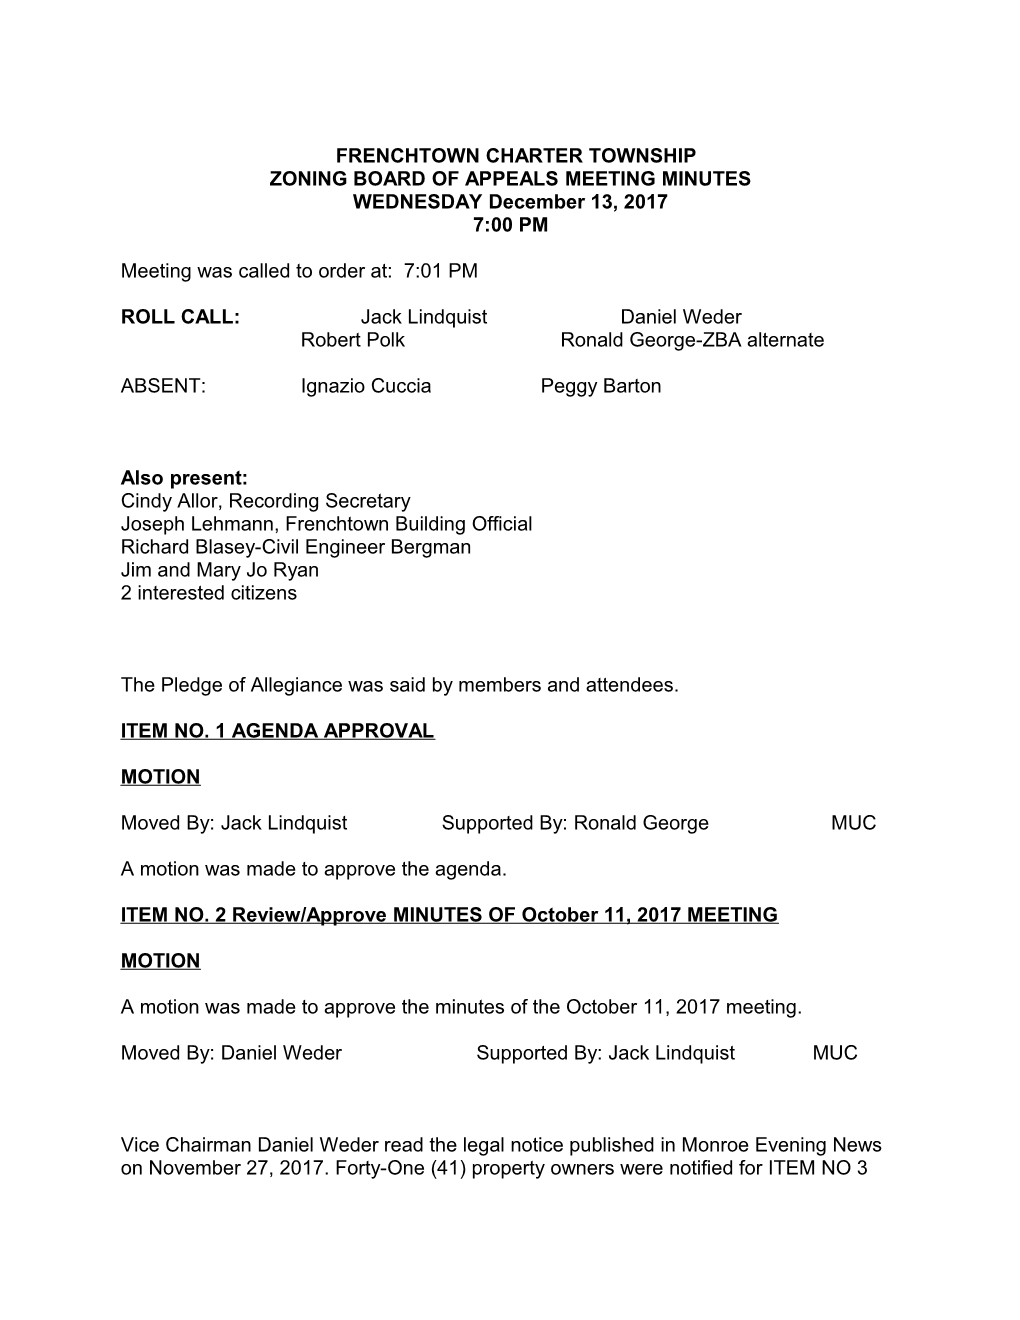 Zoning Board of Appeals Meeting Minutes